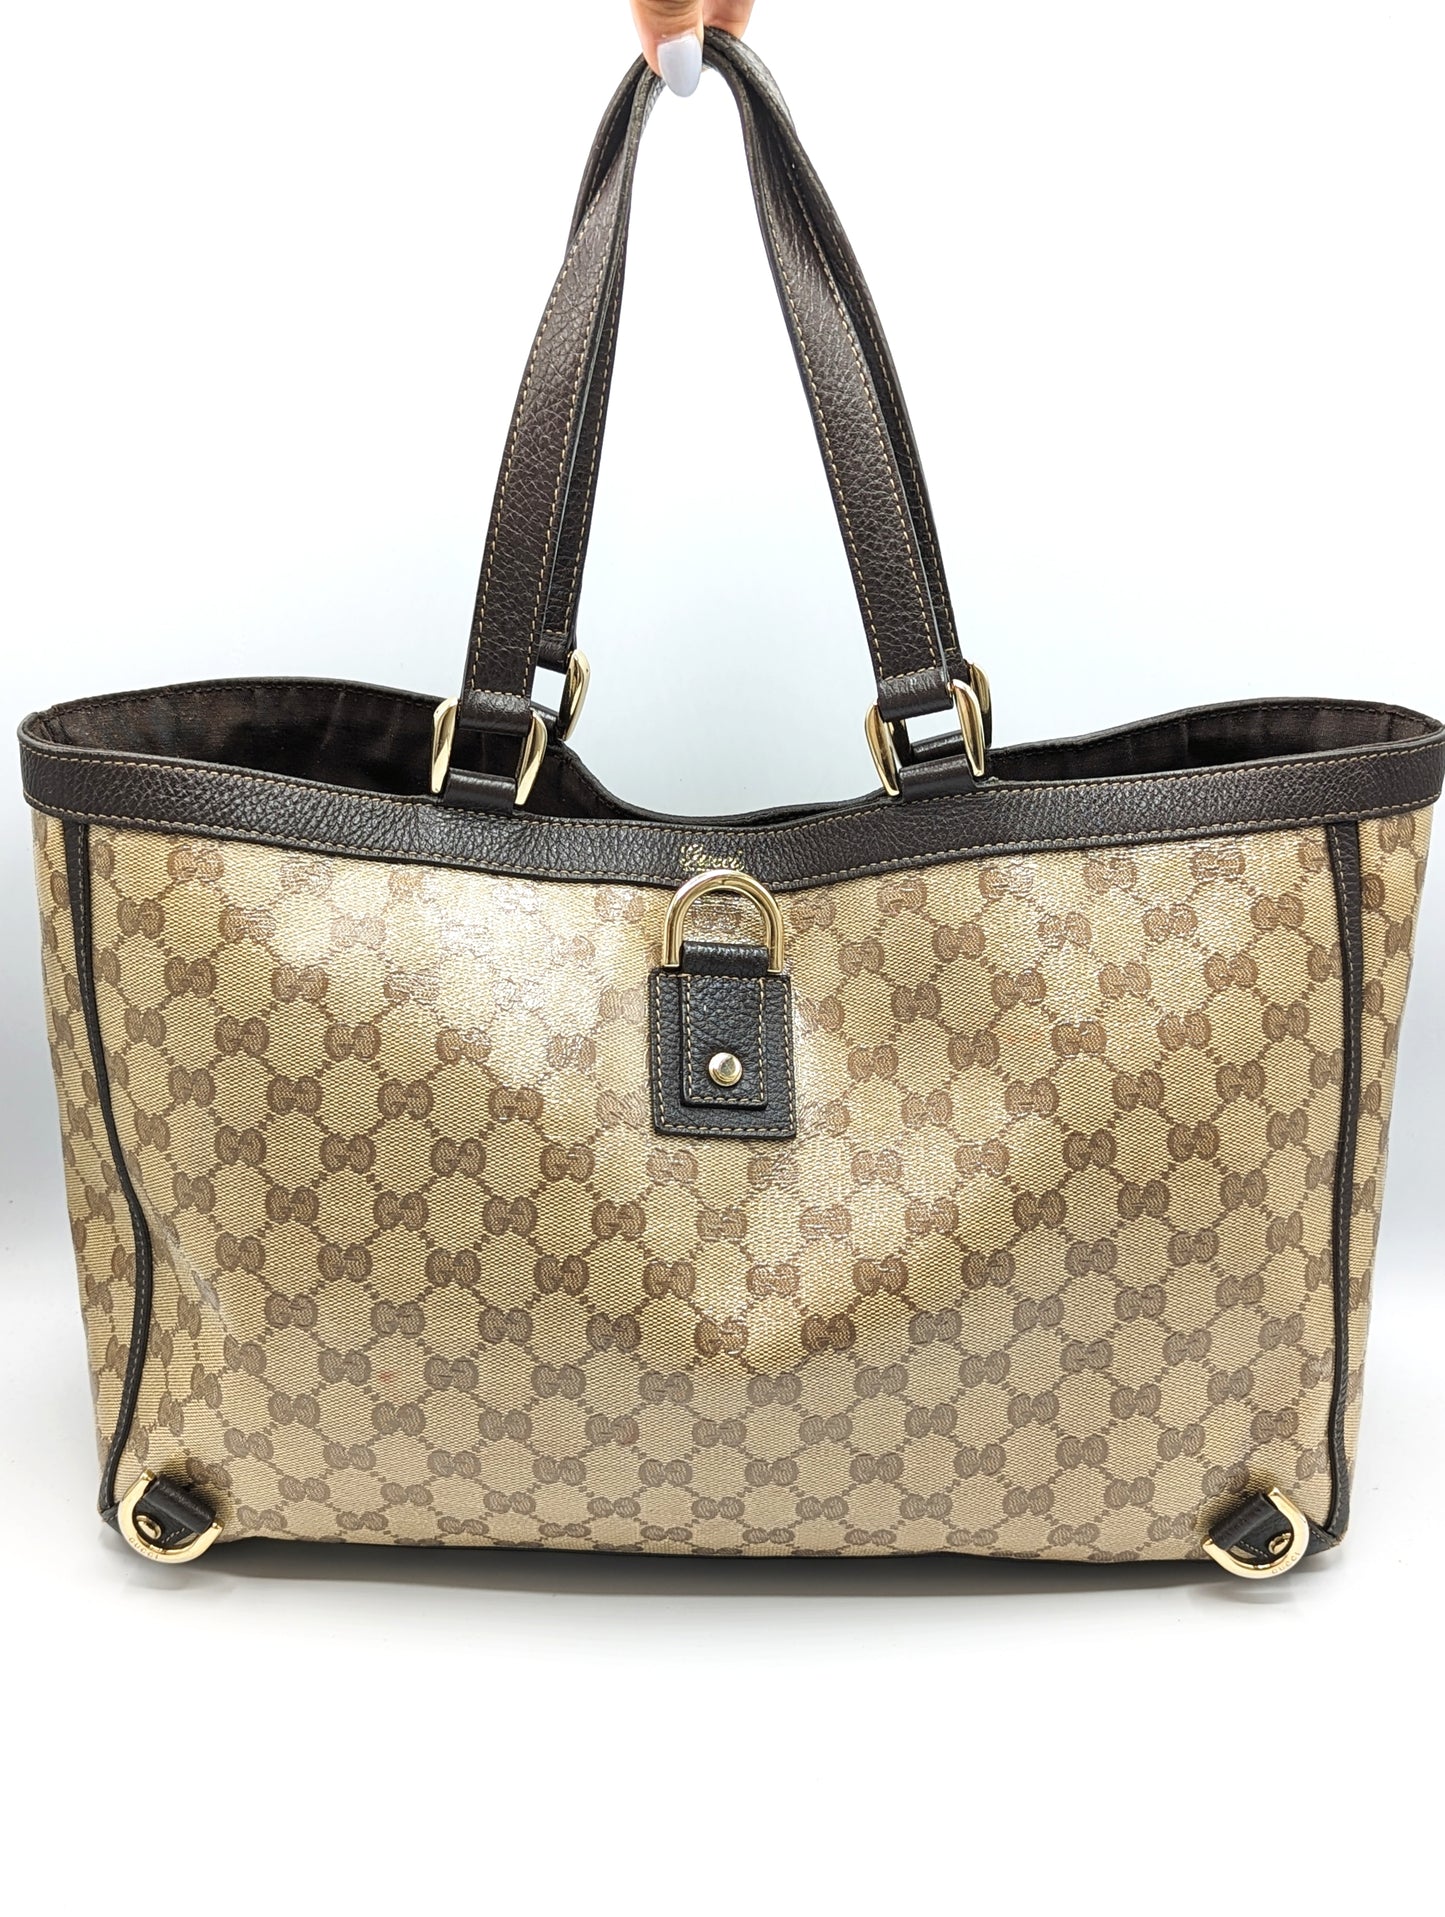 Gucci Crystal Monogram Large Abbey Tote